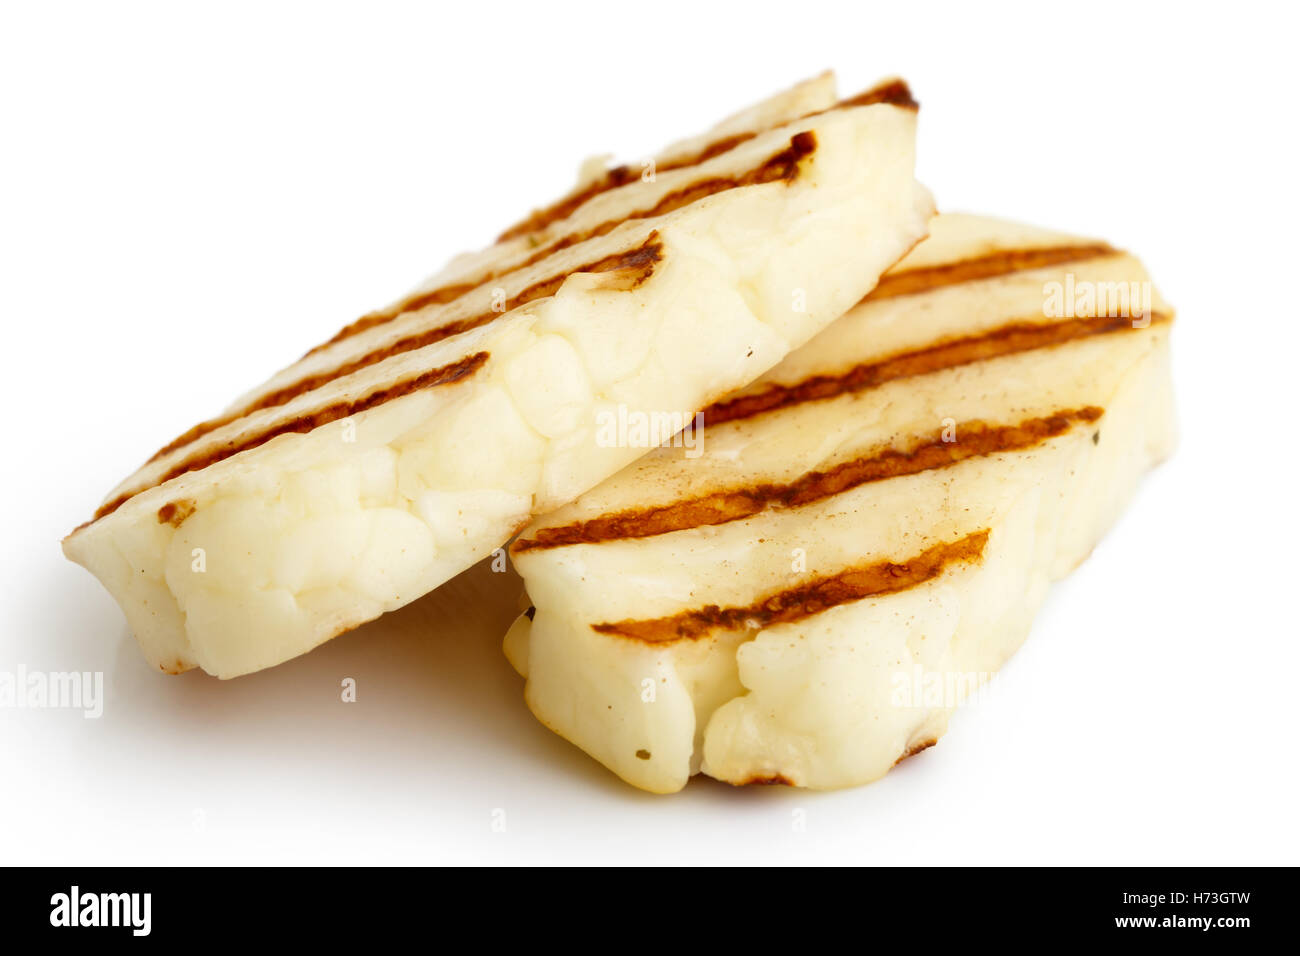 Two grilled slices of halloumi cheese isolated on white in perspective. With grill marks. Stock Photo